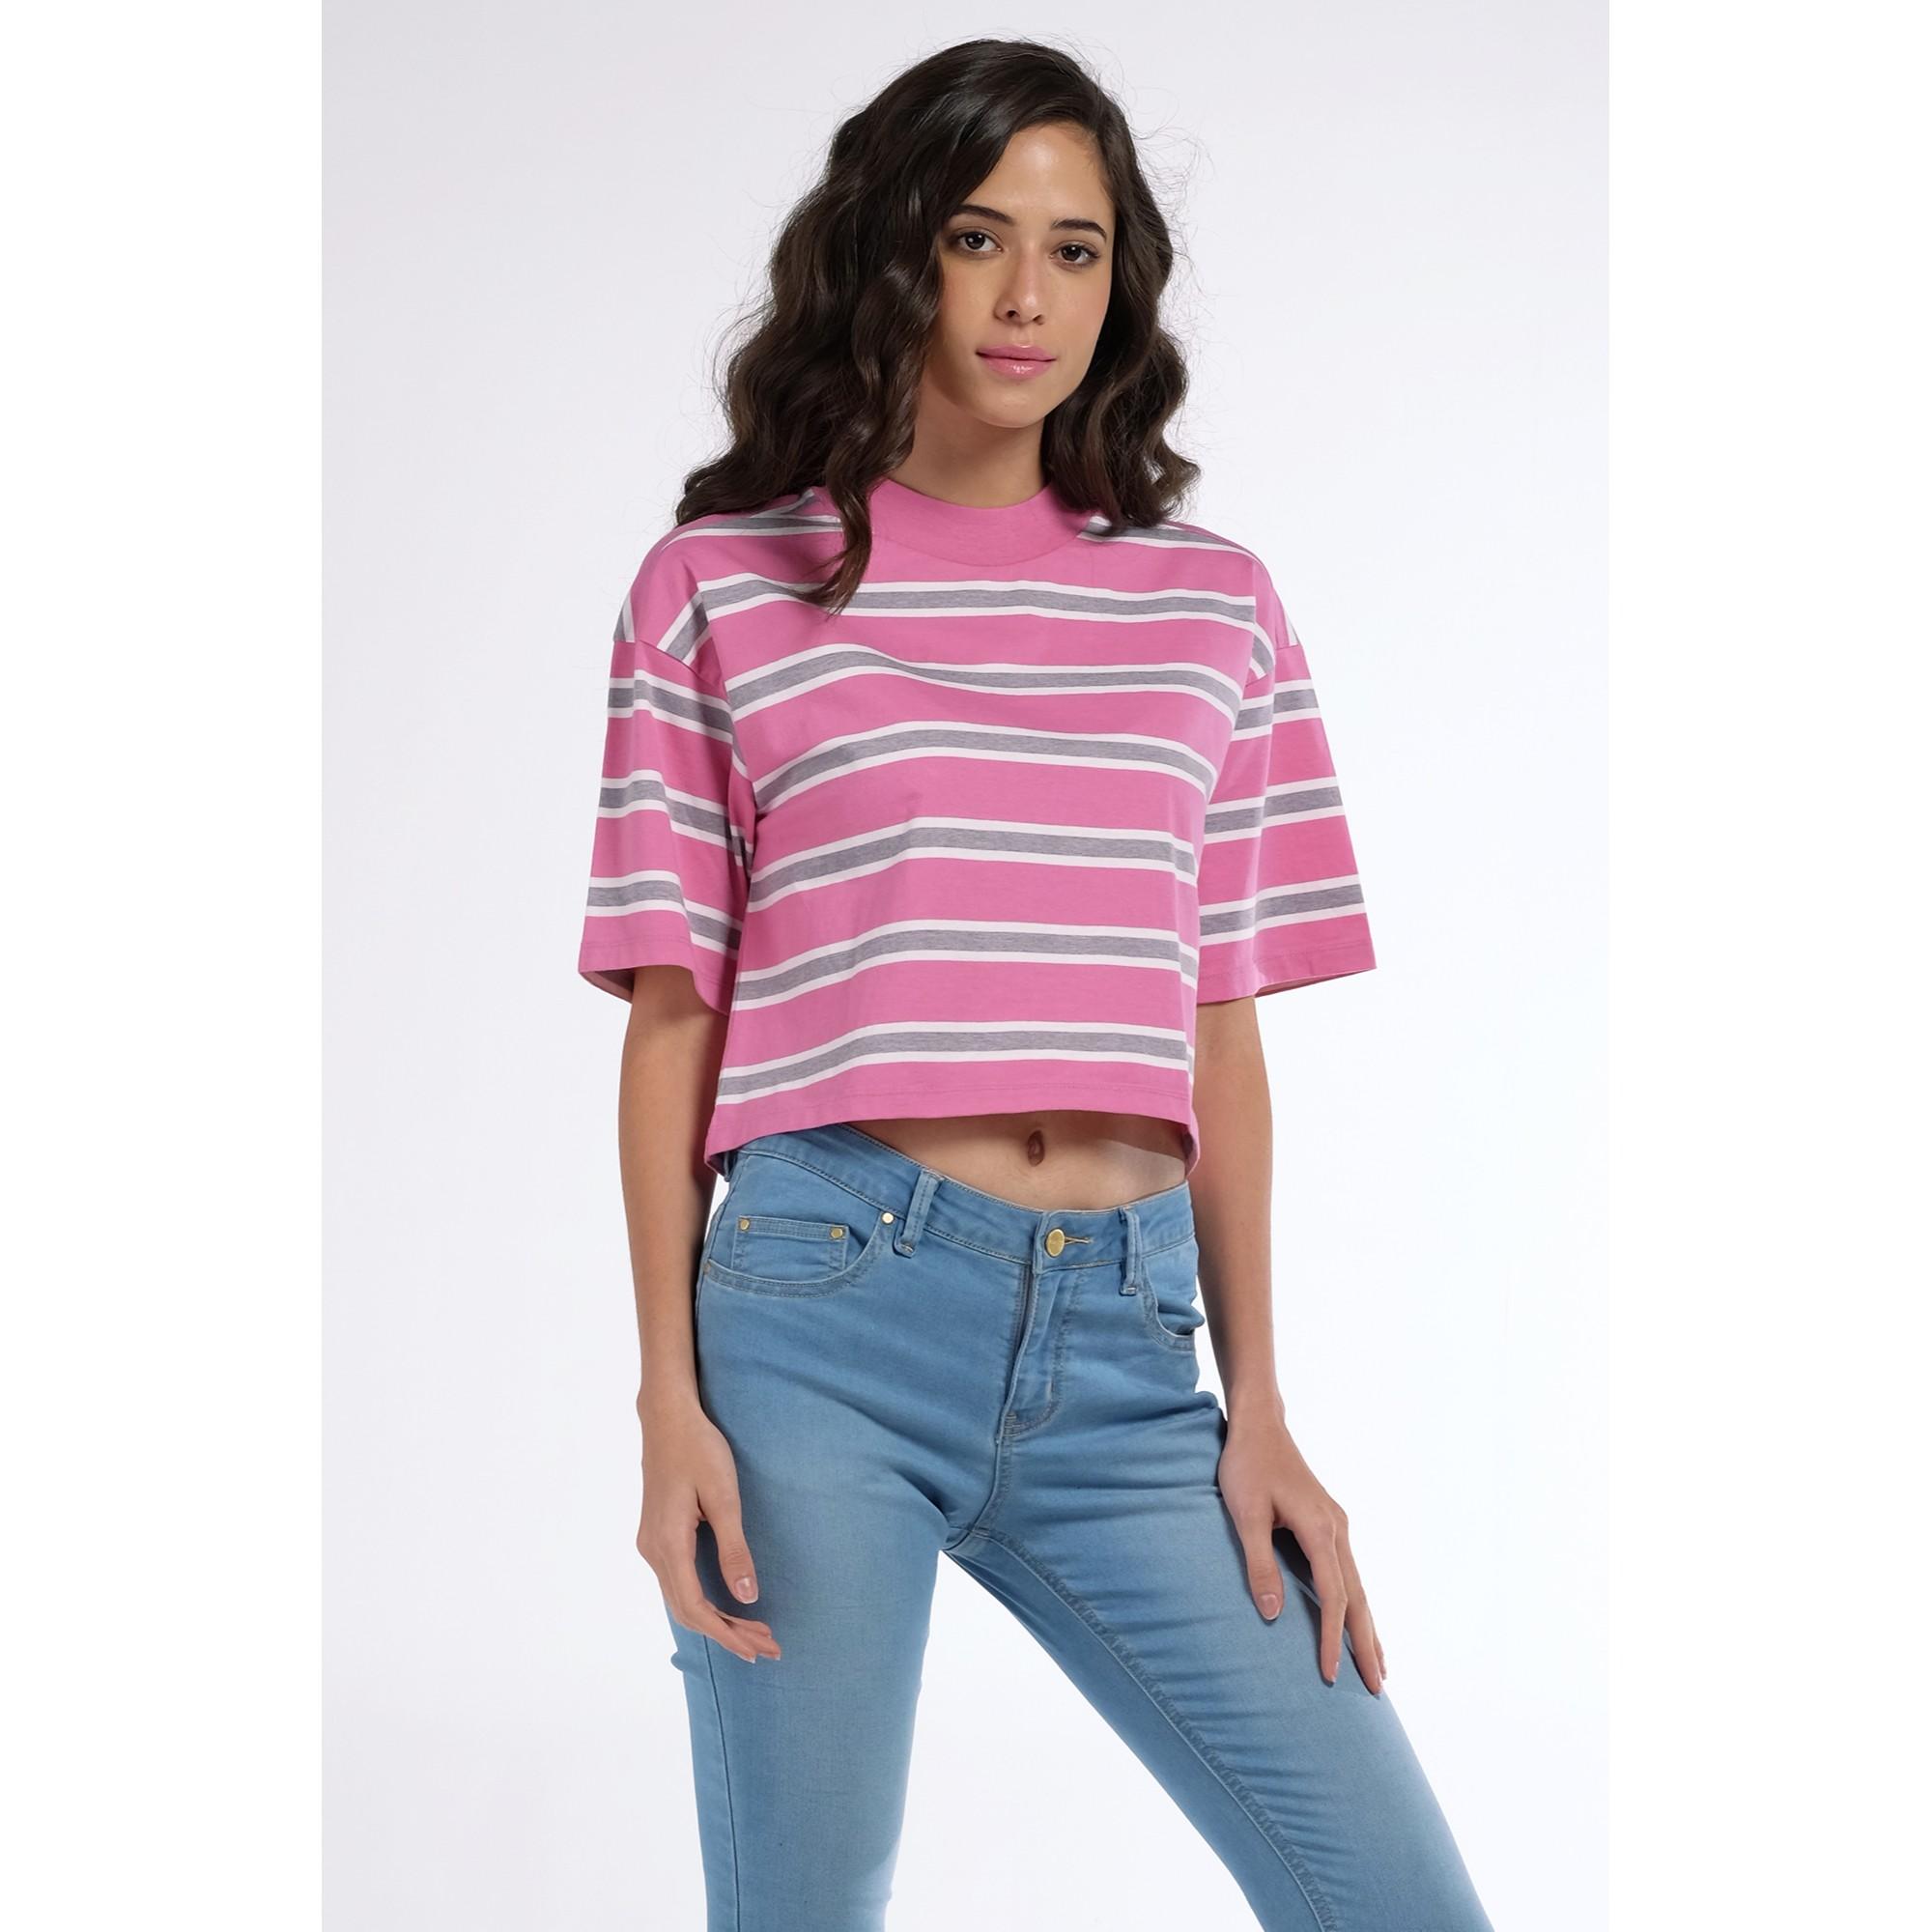 Penshoppe Store - 2019 Lowest Prices | Lazada Philippines